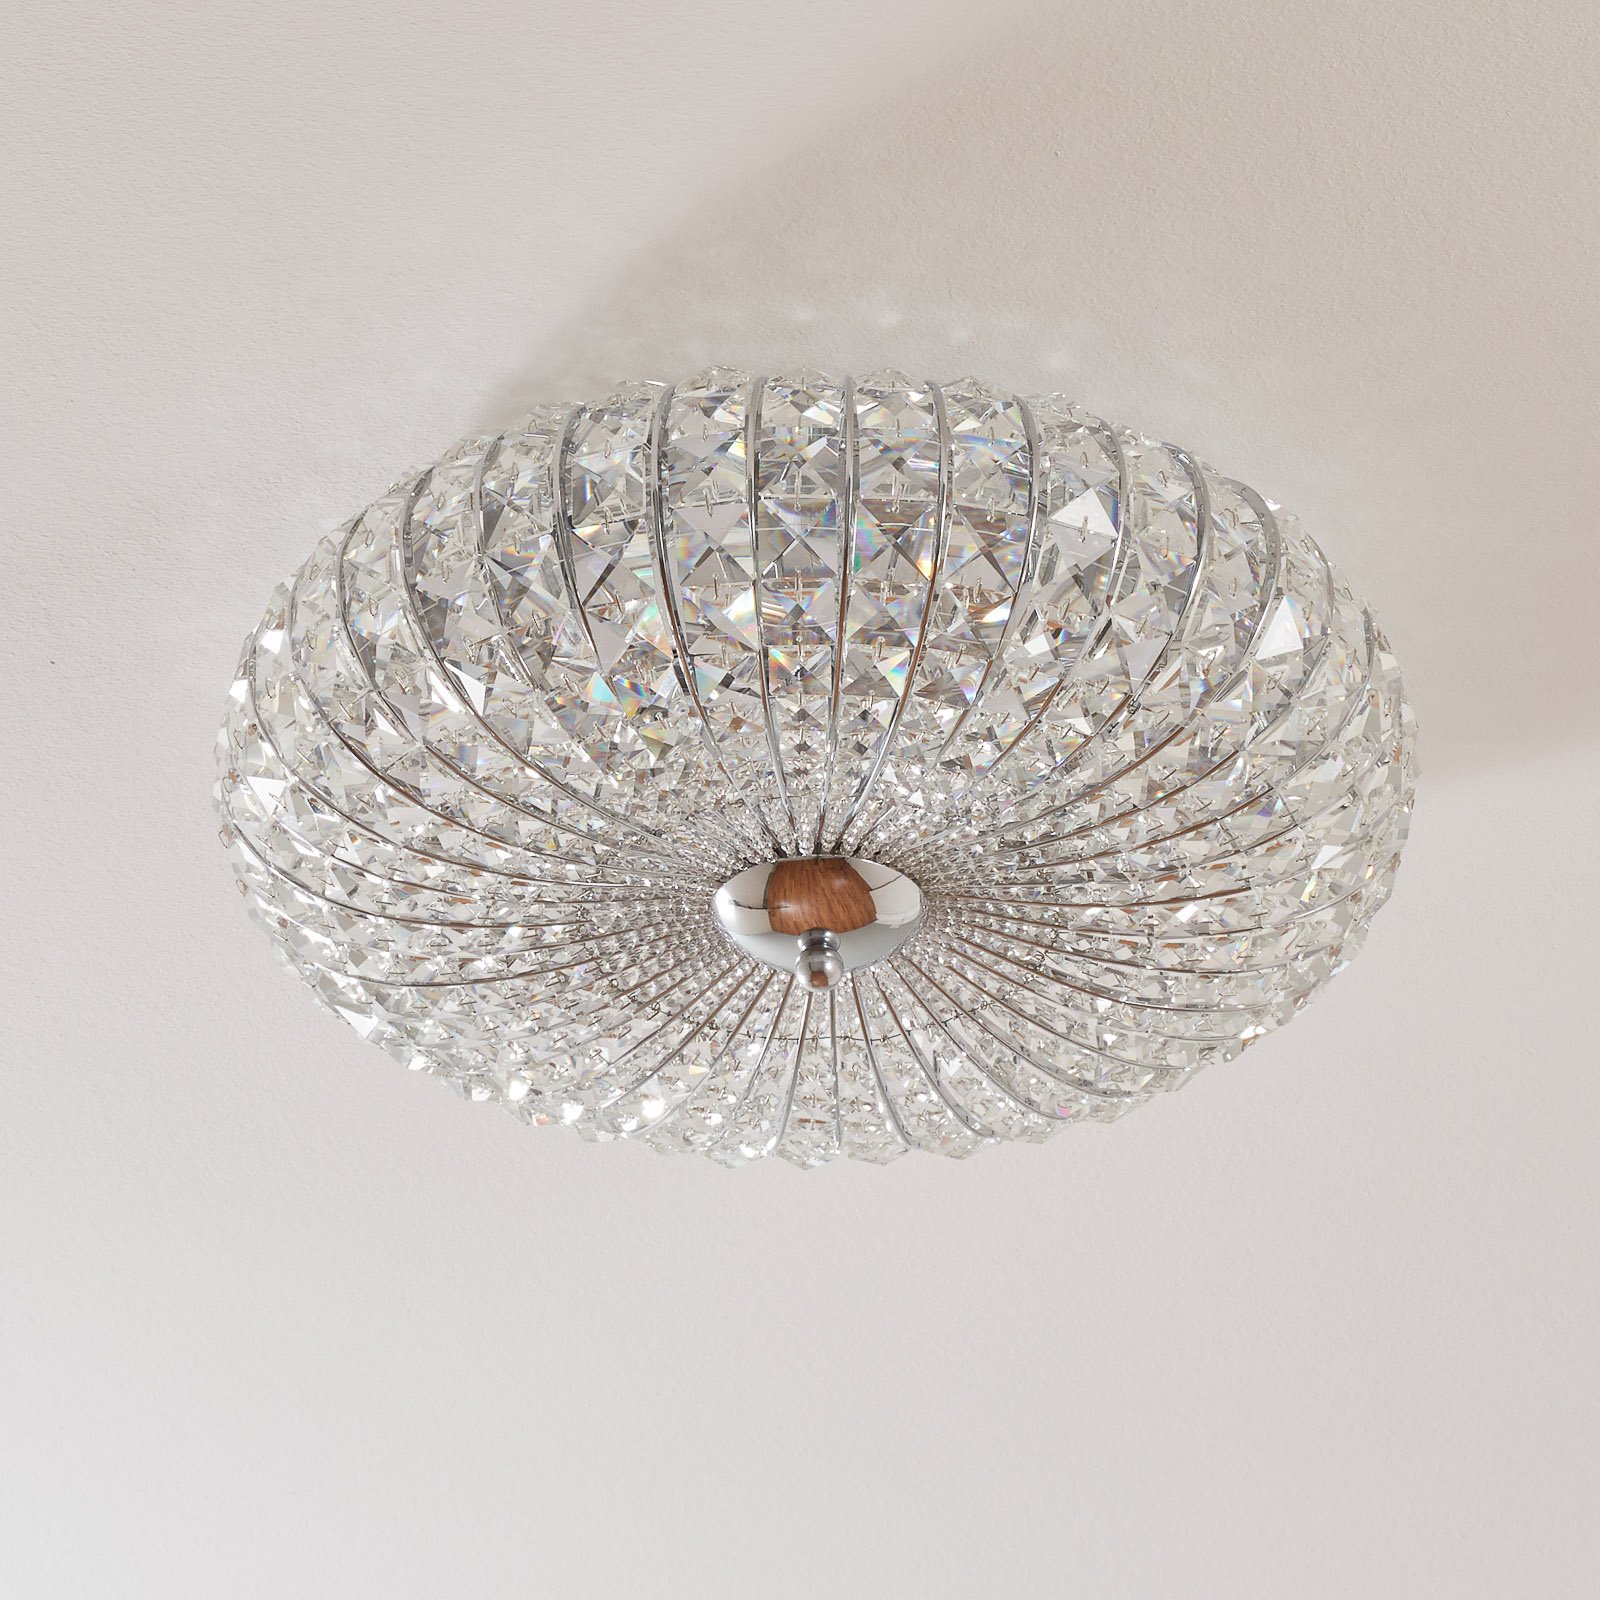 Broche ceiling light with crystals, Ø 49 cm